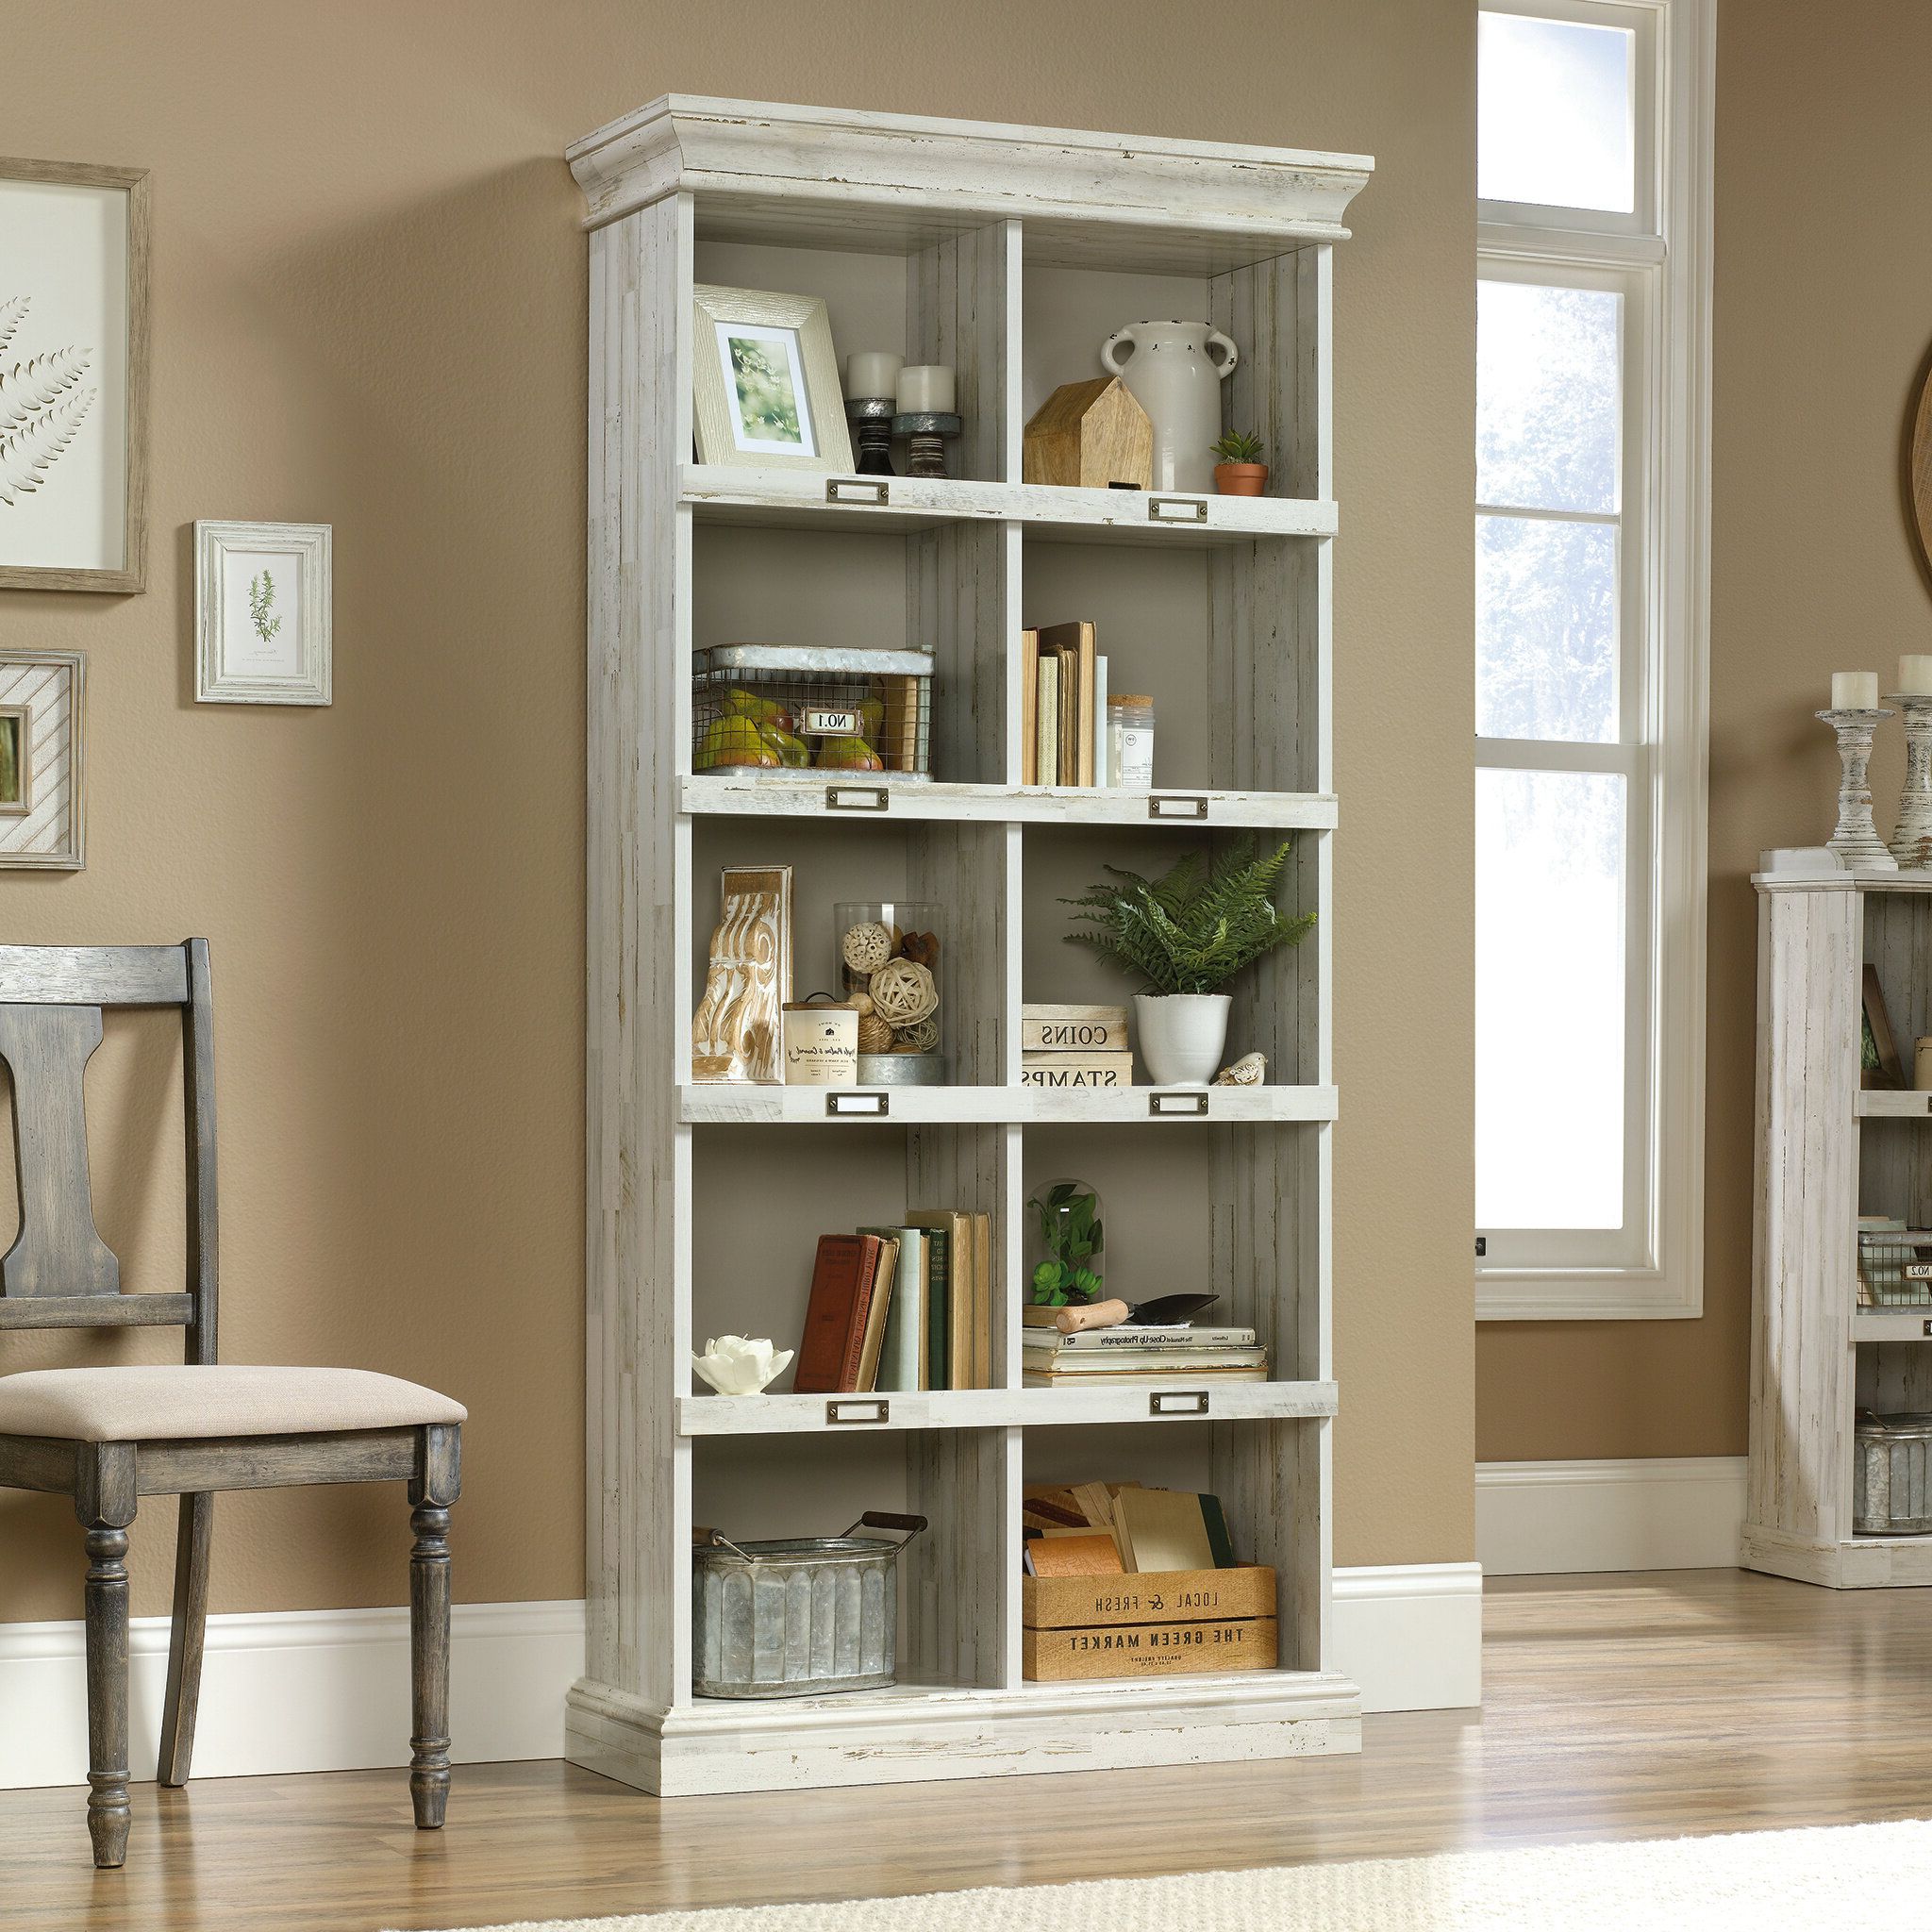 Bowerbank Standard Bookcase With Most Up To Date Pinellas Standard Bookcases (View 19 of 20)